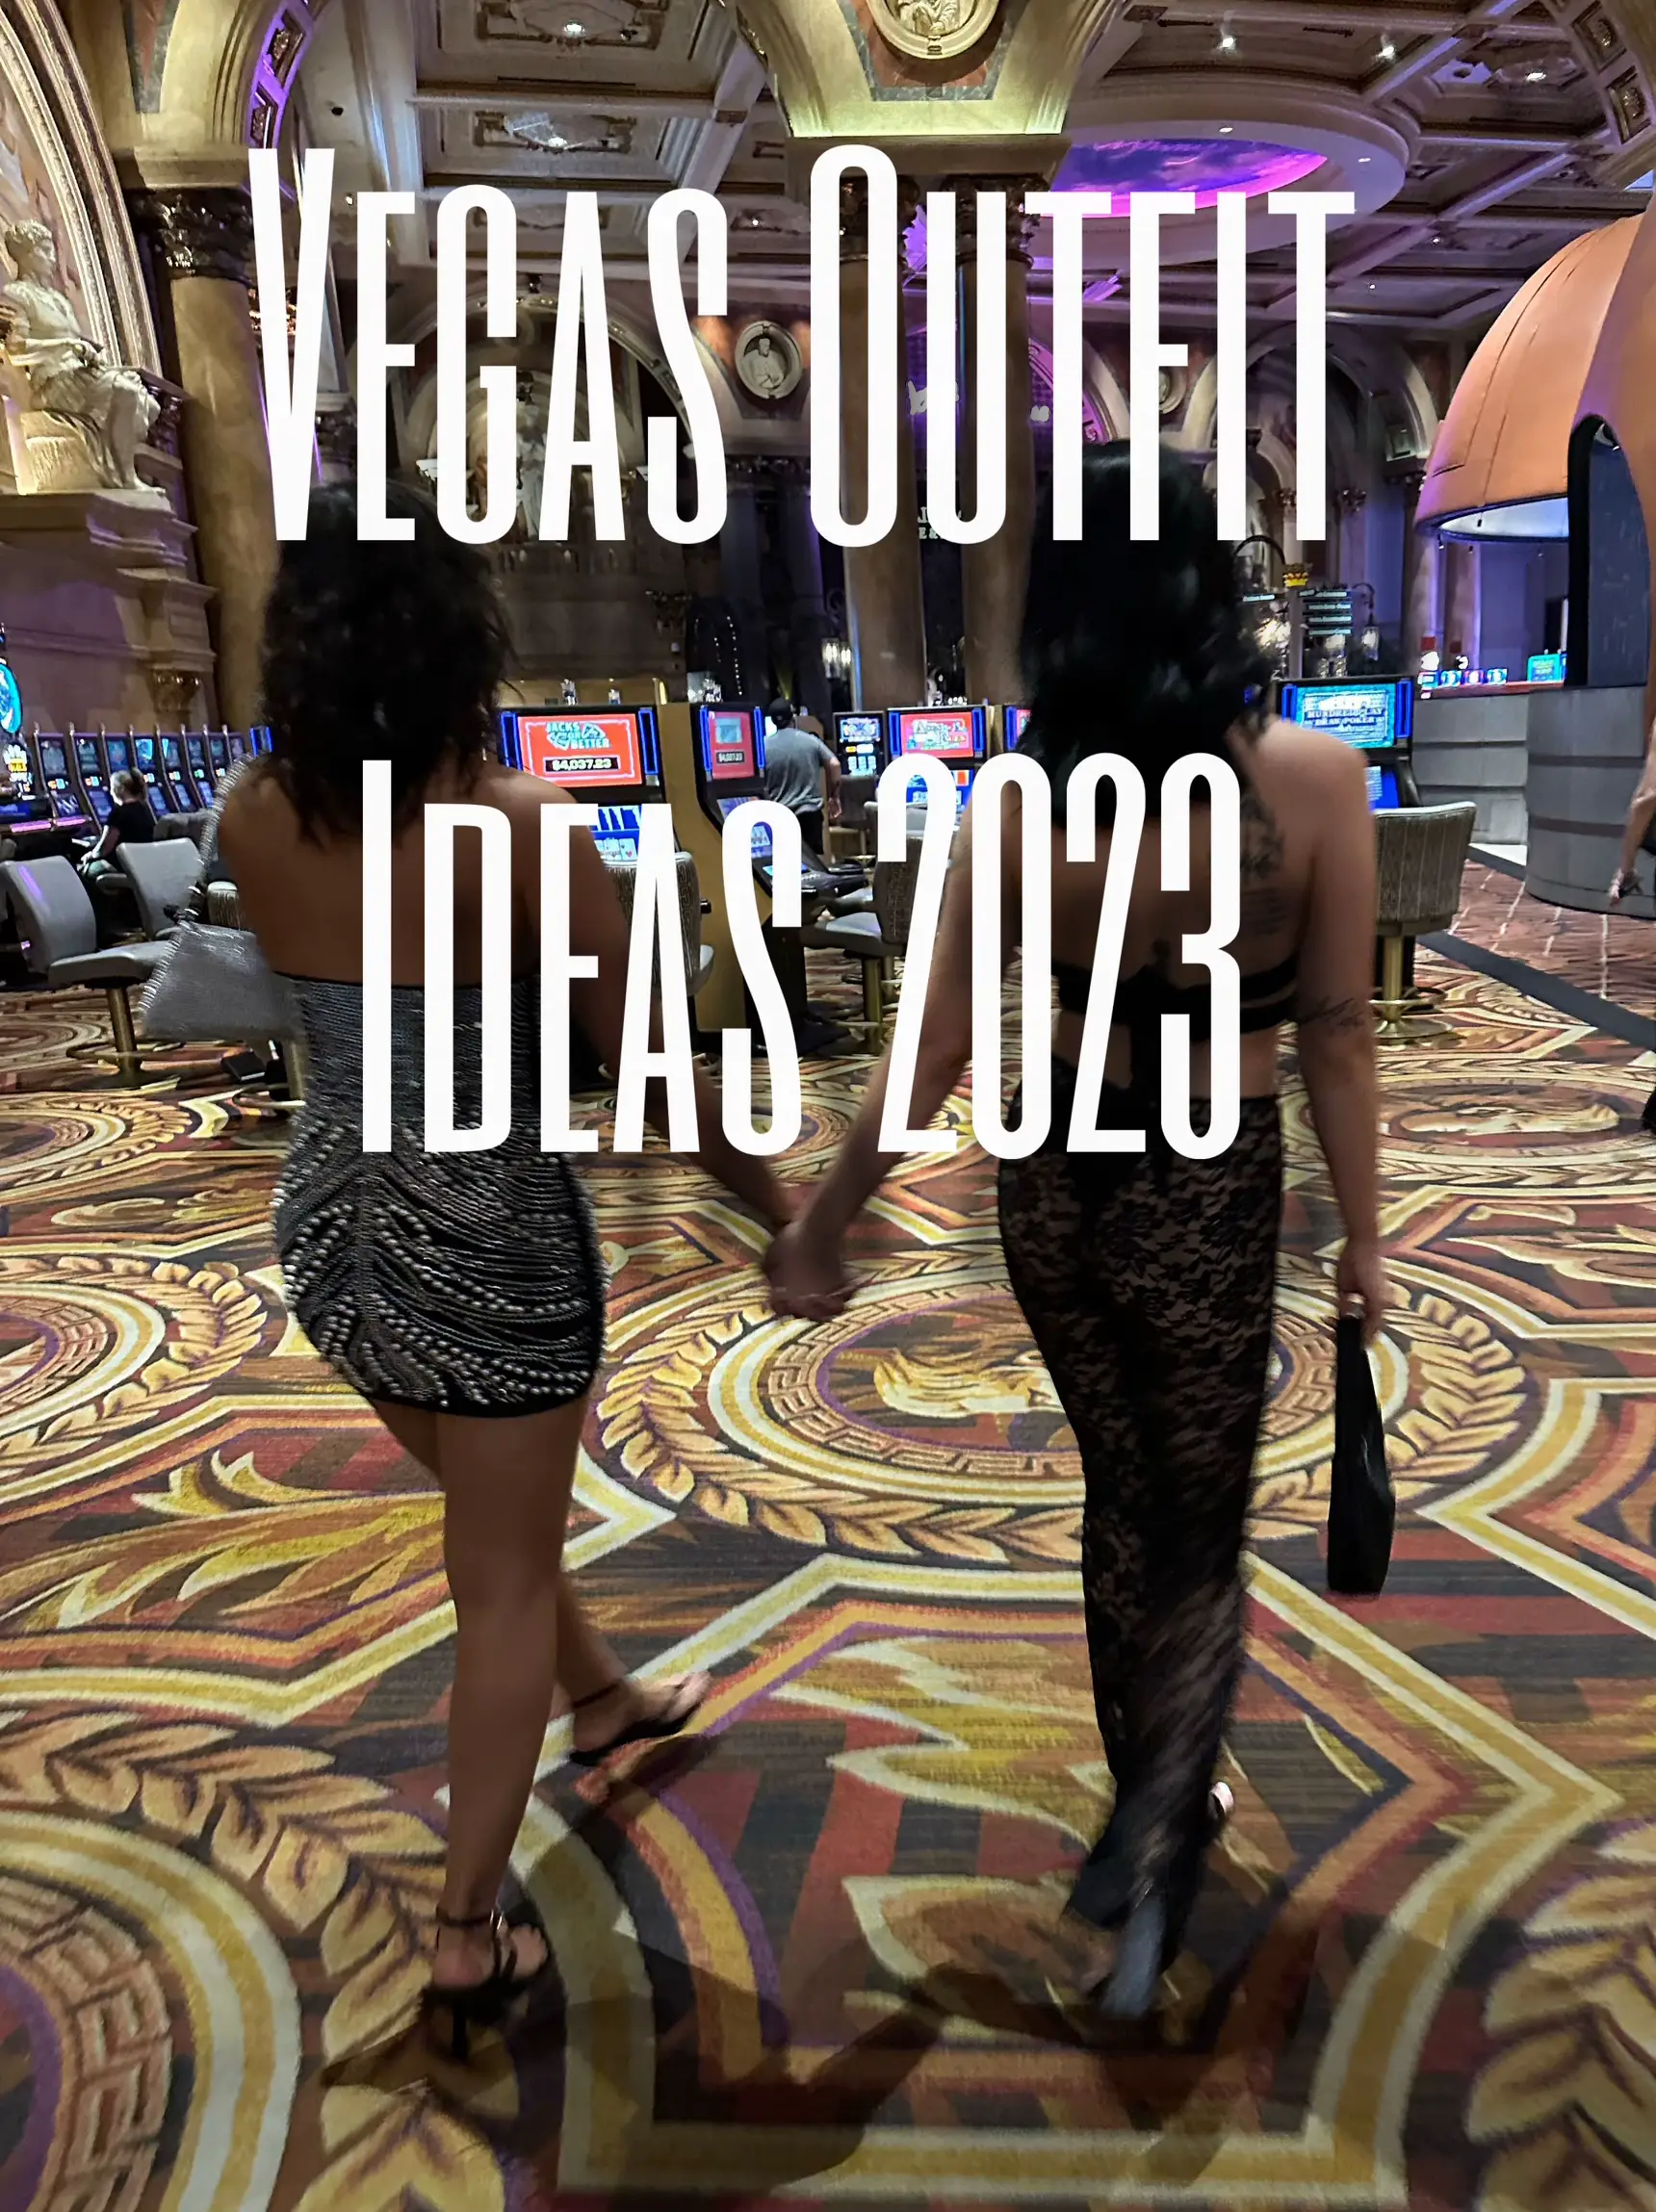 EDC LAS VEGAS OUTFIT IDEAS & TRY ON 